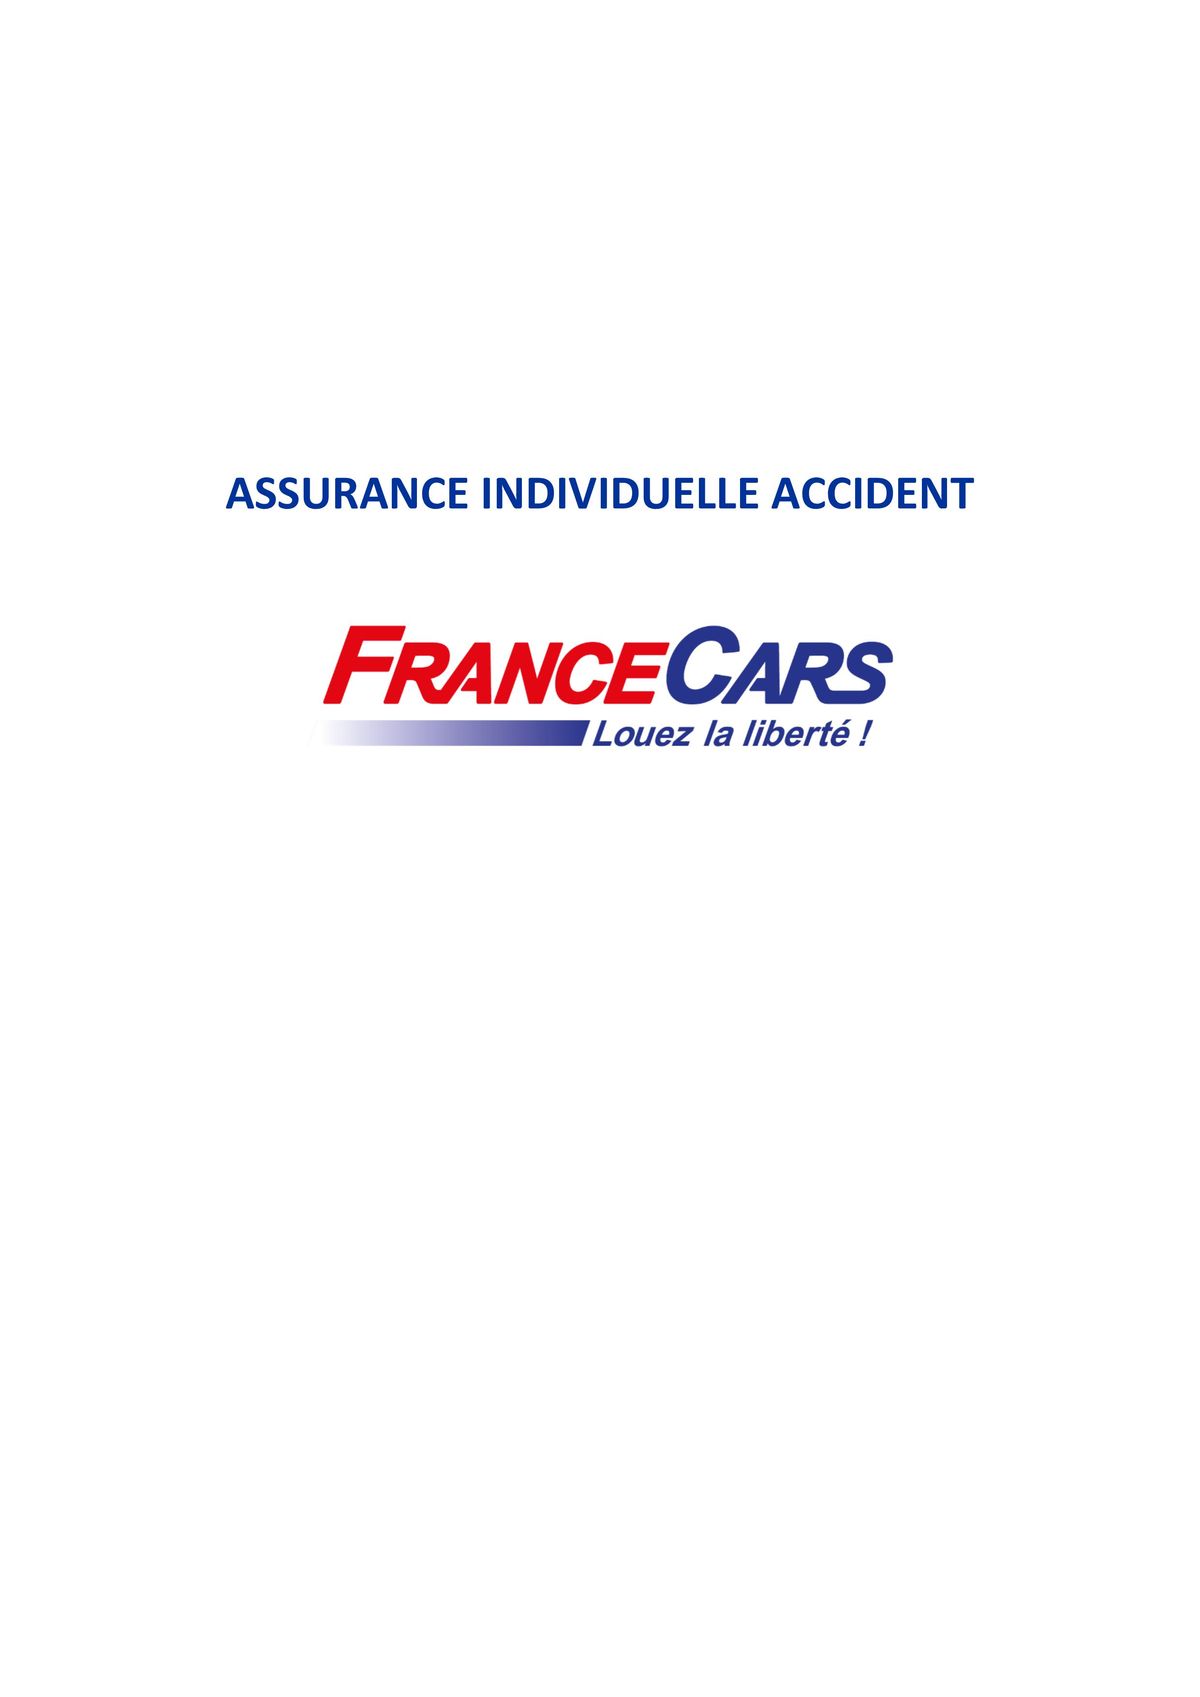 Catalogue ASSURANCE INDIVIDUELLE ACCIDENT, page 00001